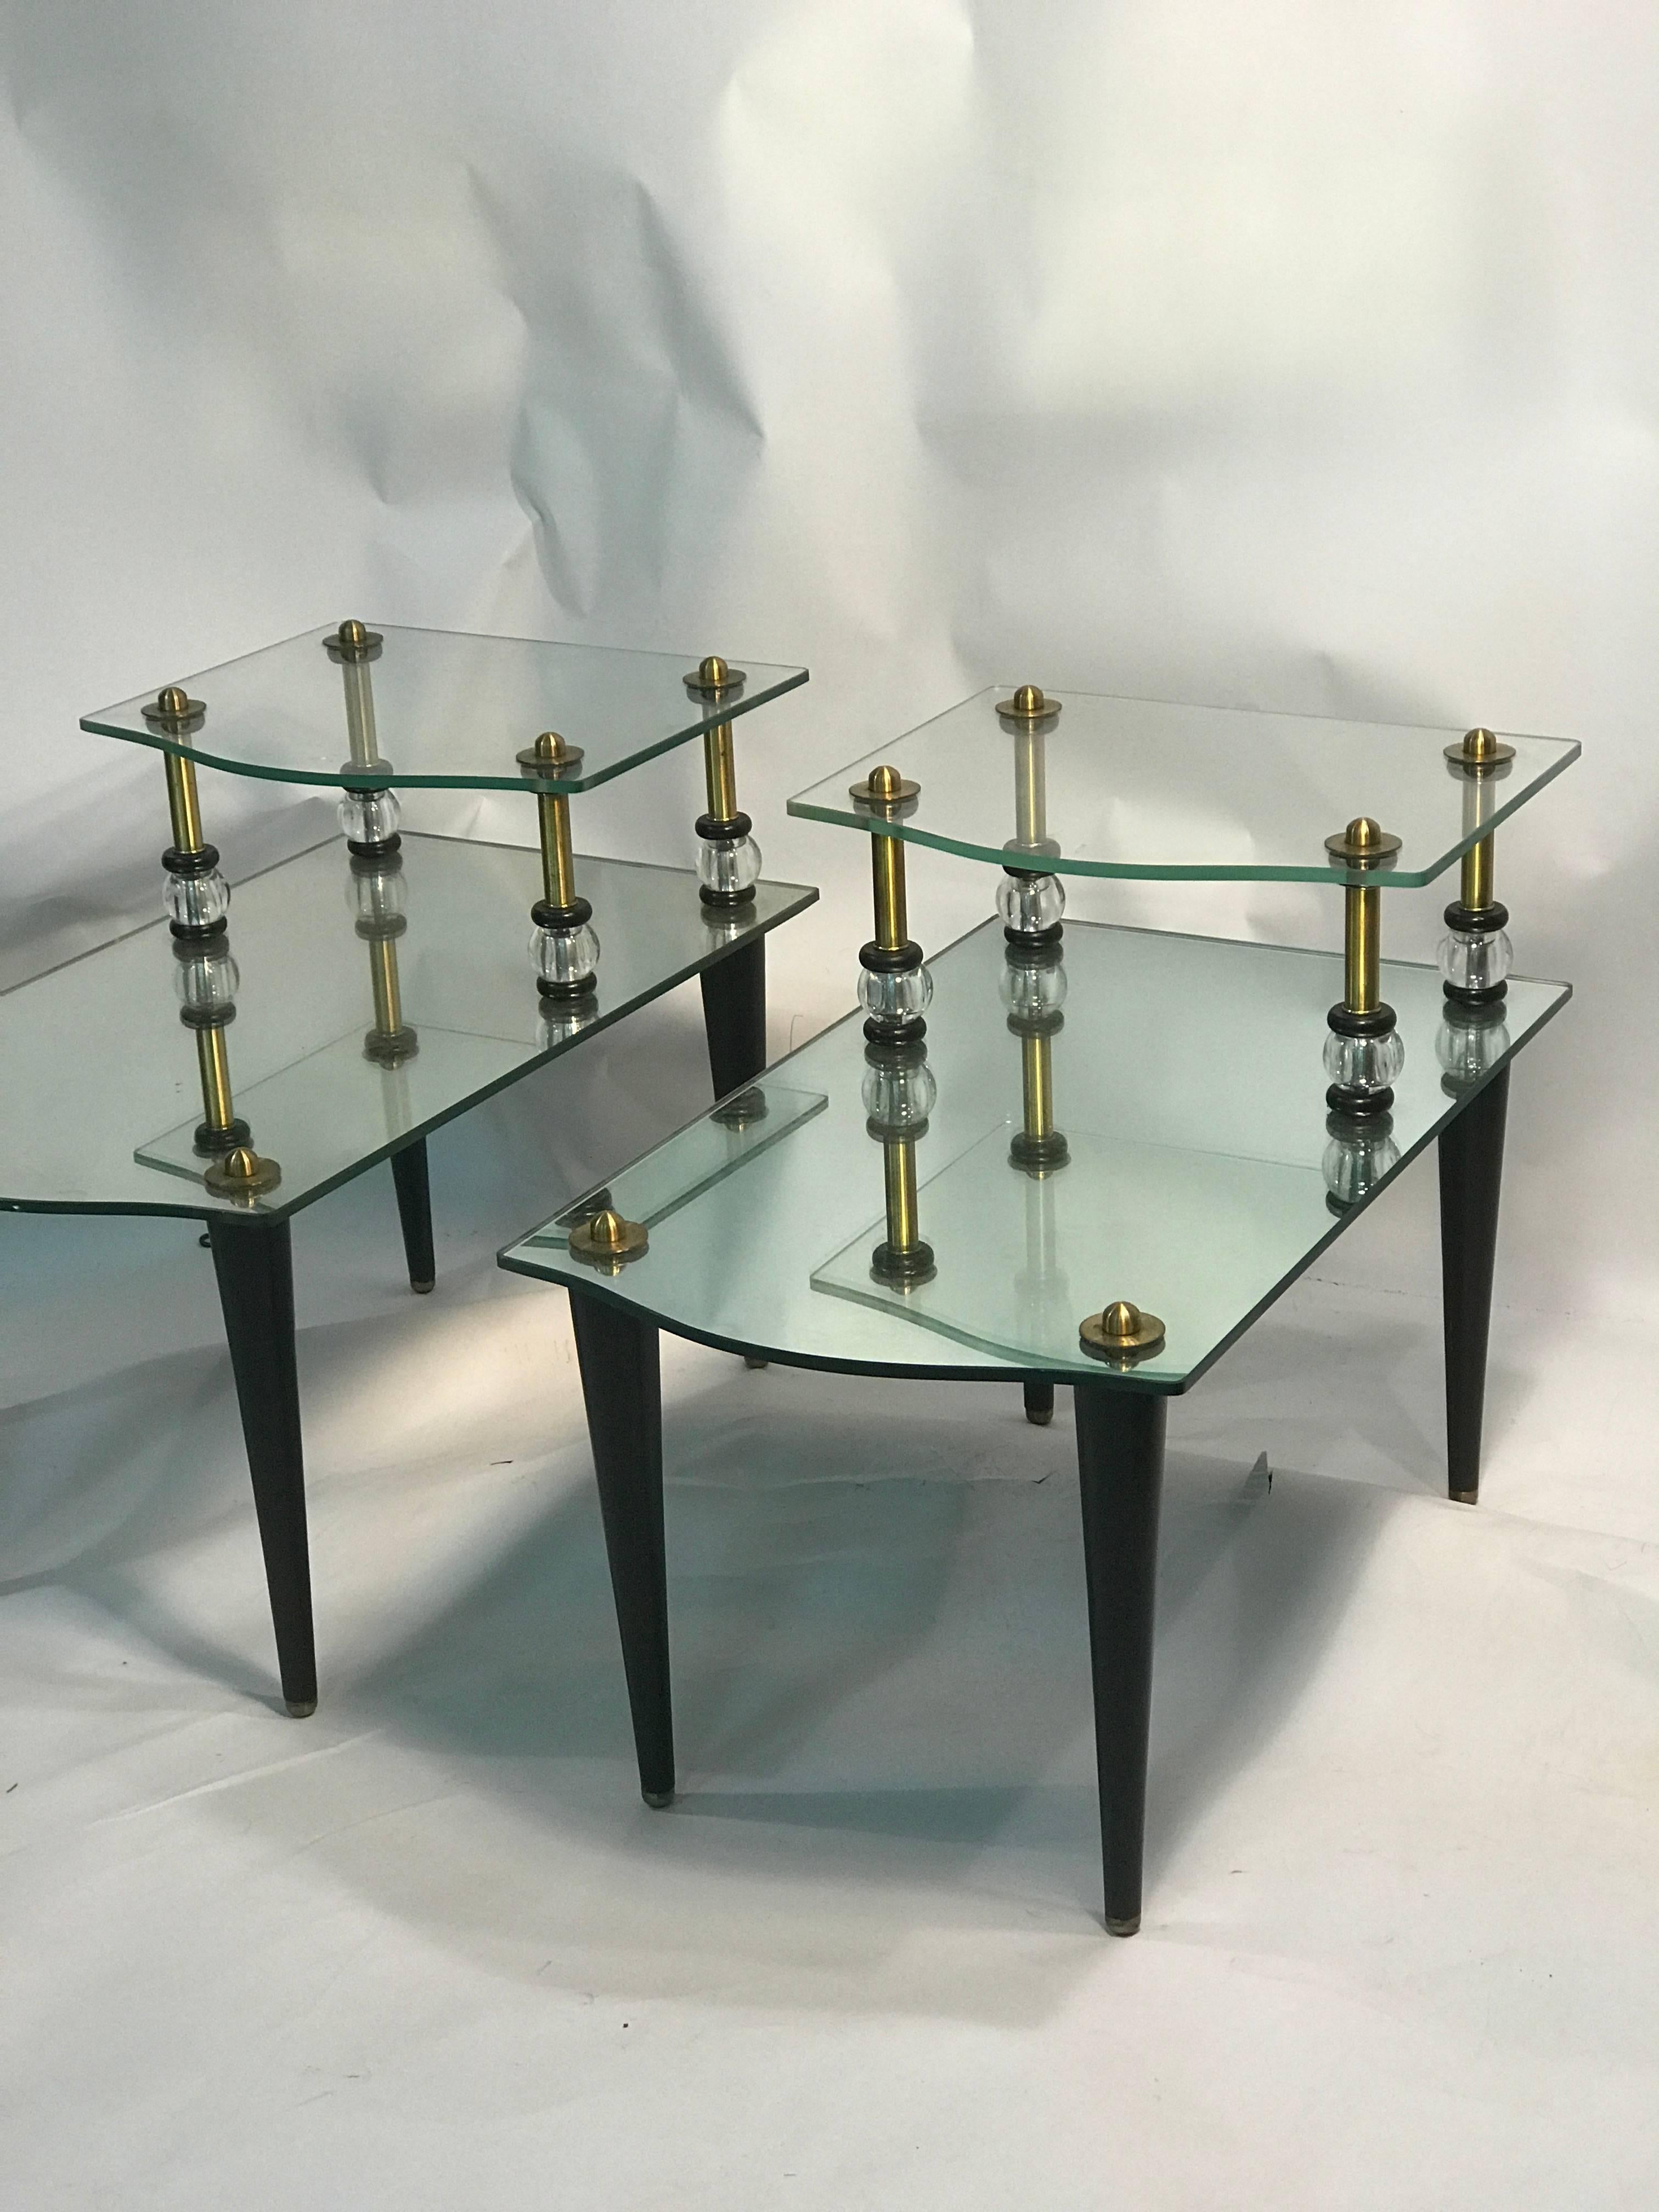 An exceptional pair of mirrored two-tier side, or end tables with brass accents, round Lucite balls with beautiful design, and tapered legs, circa 1970. Good vintage condition with age appropriate wear.

Top tier measures 23